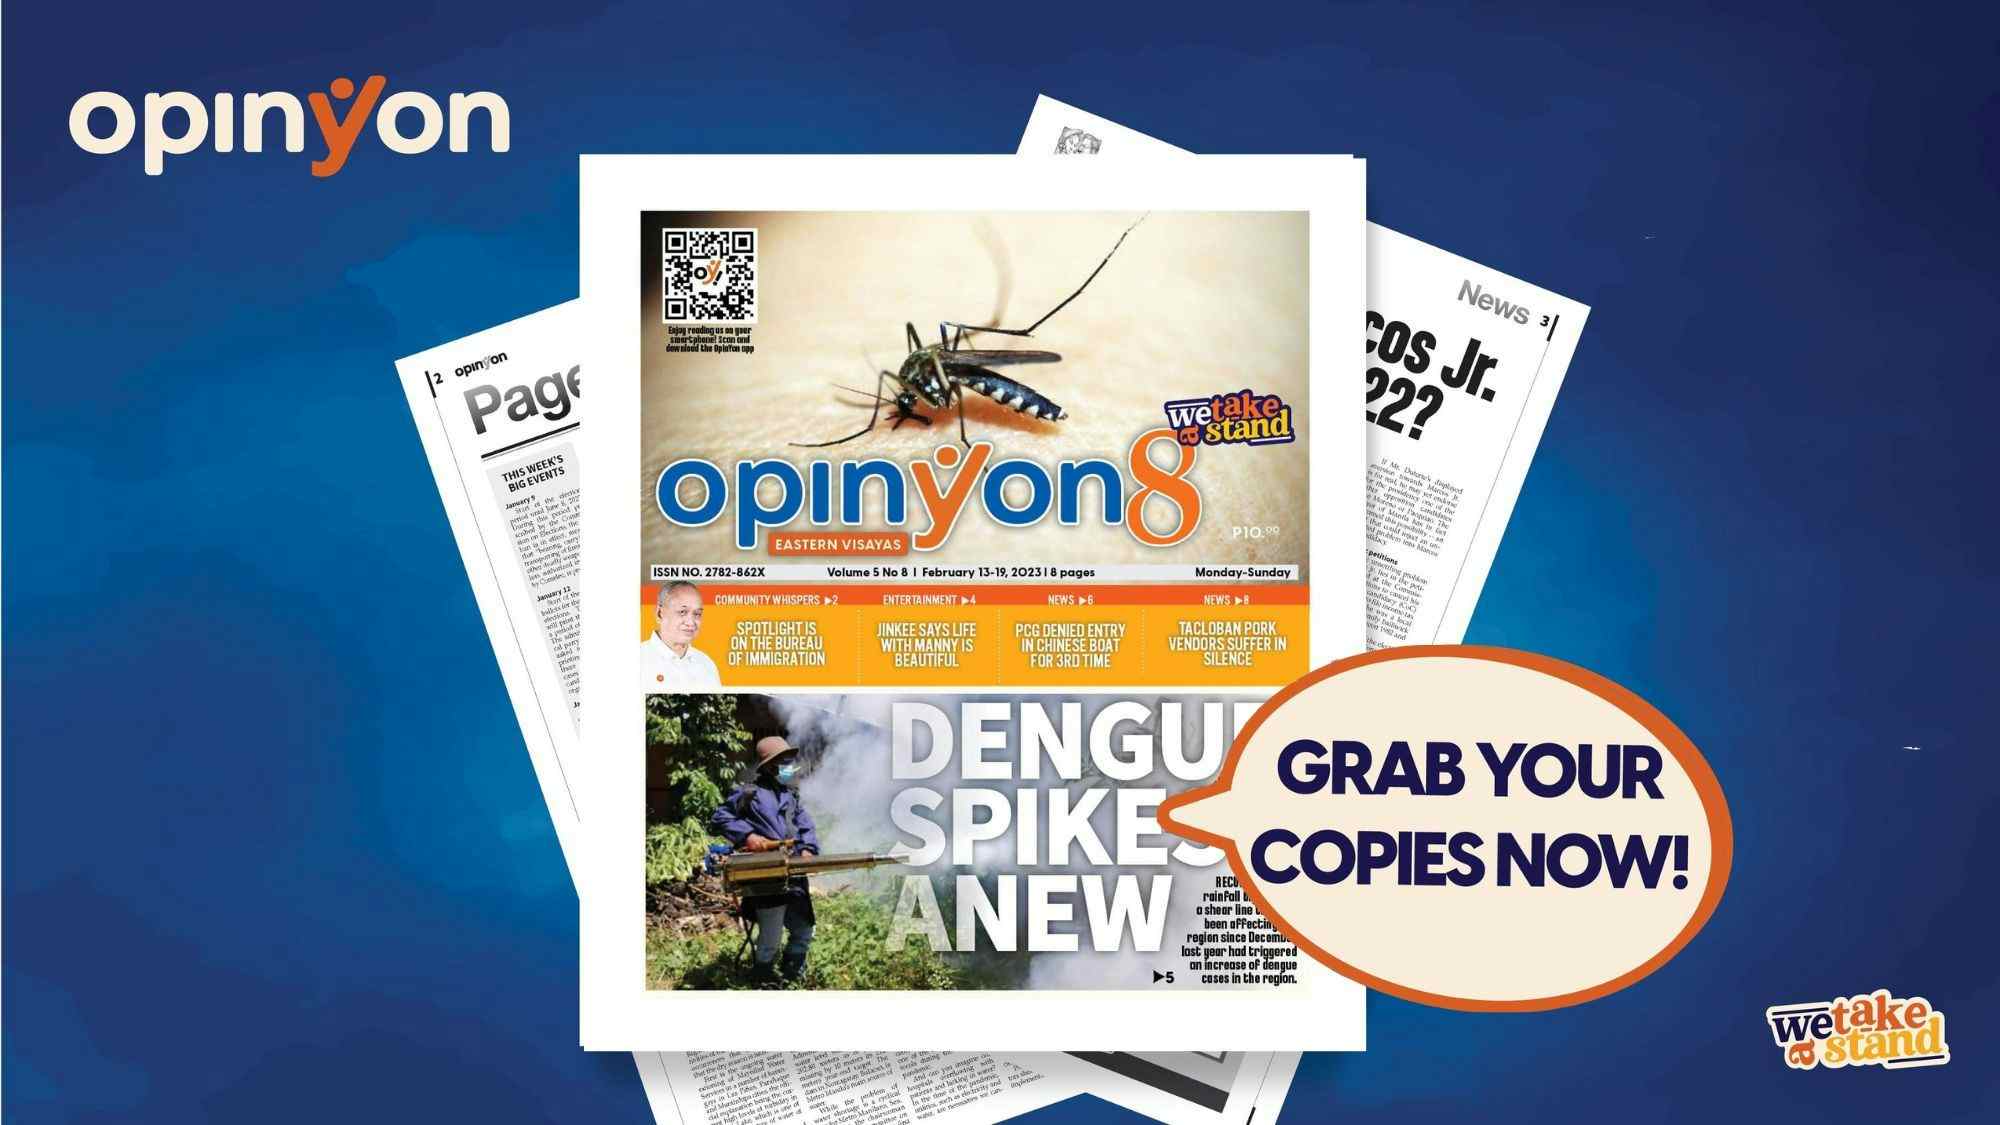 Dengue spikes anew